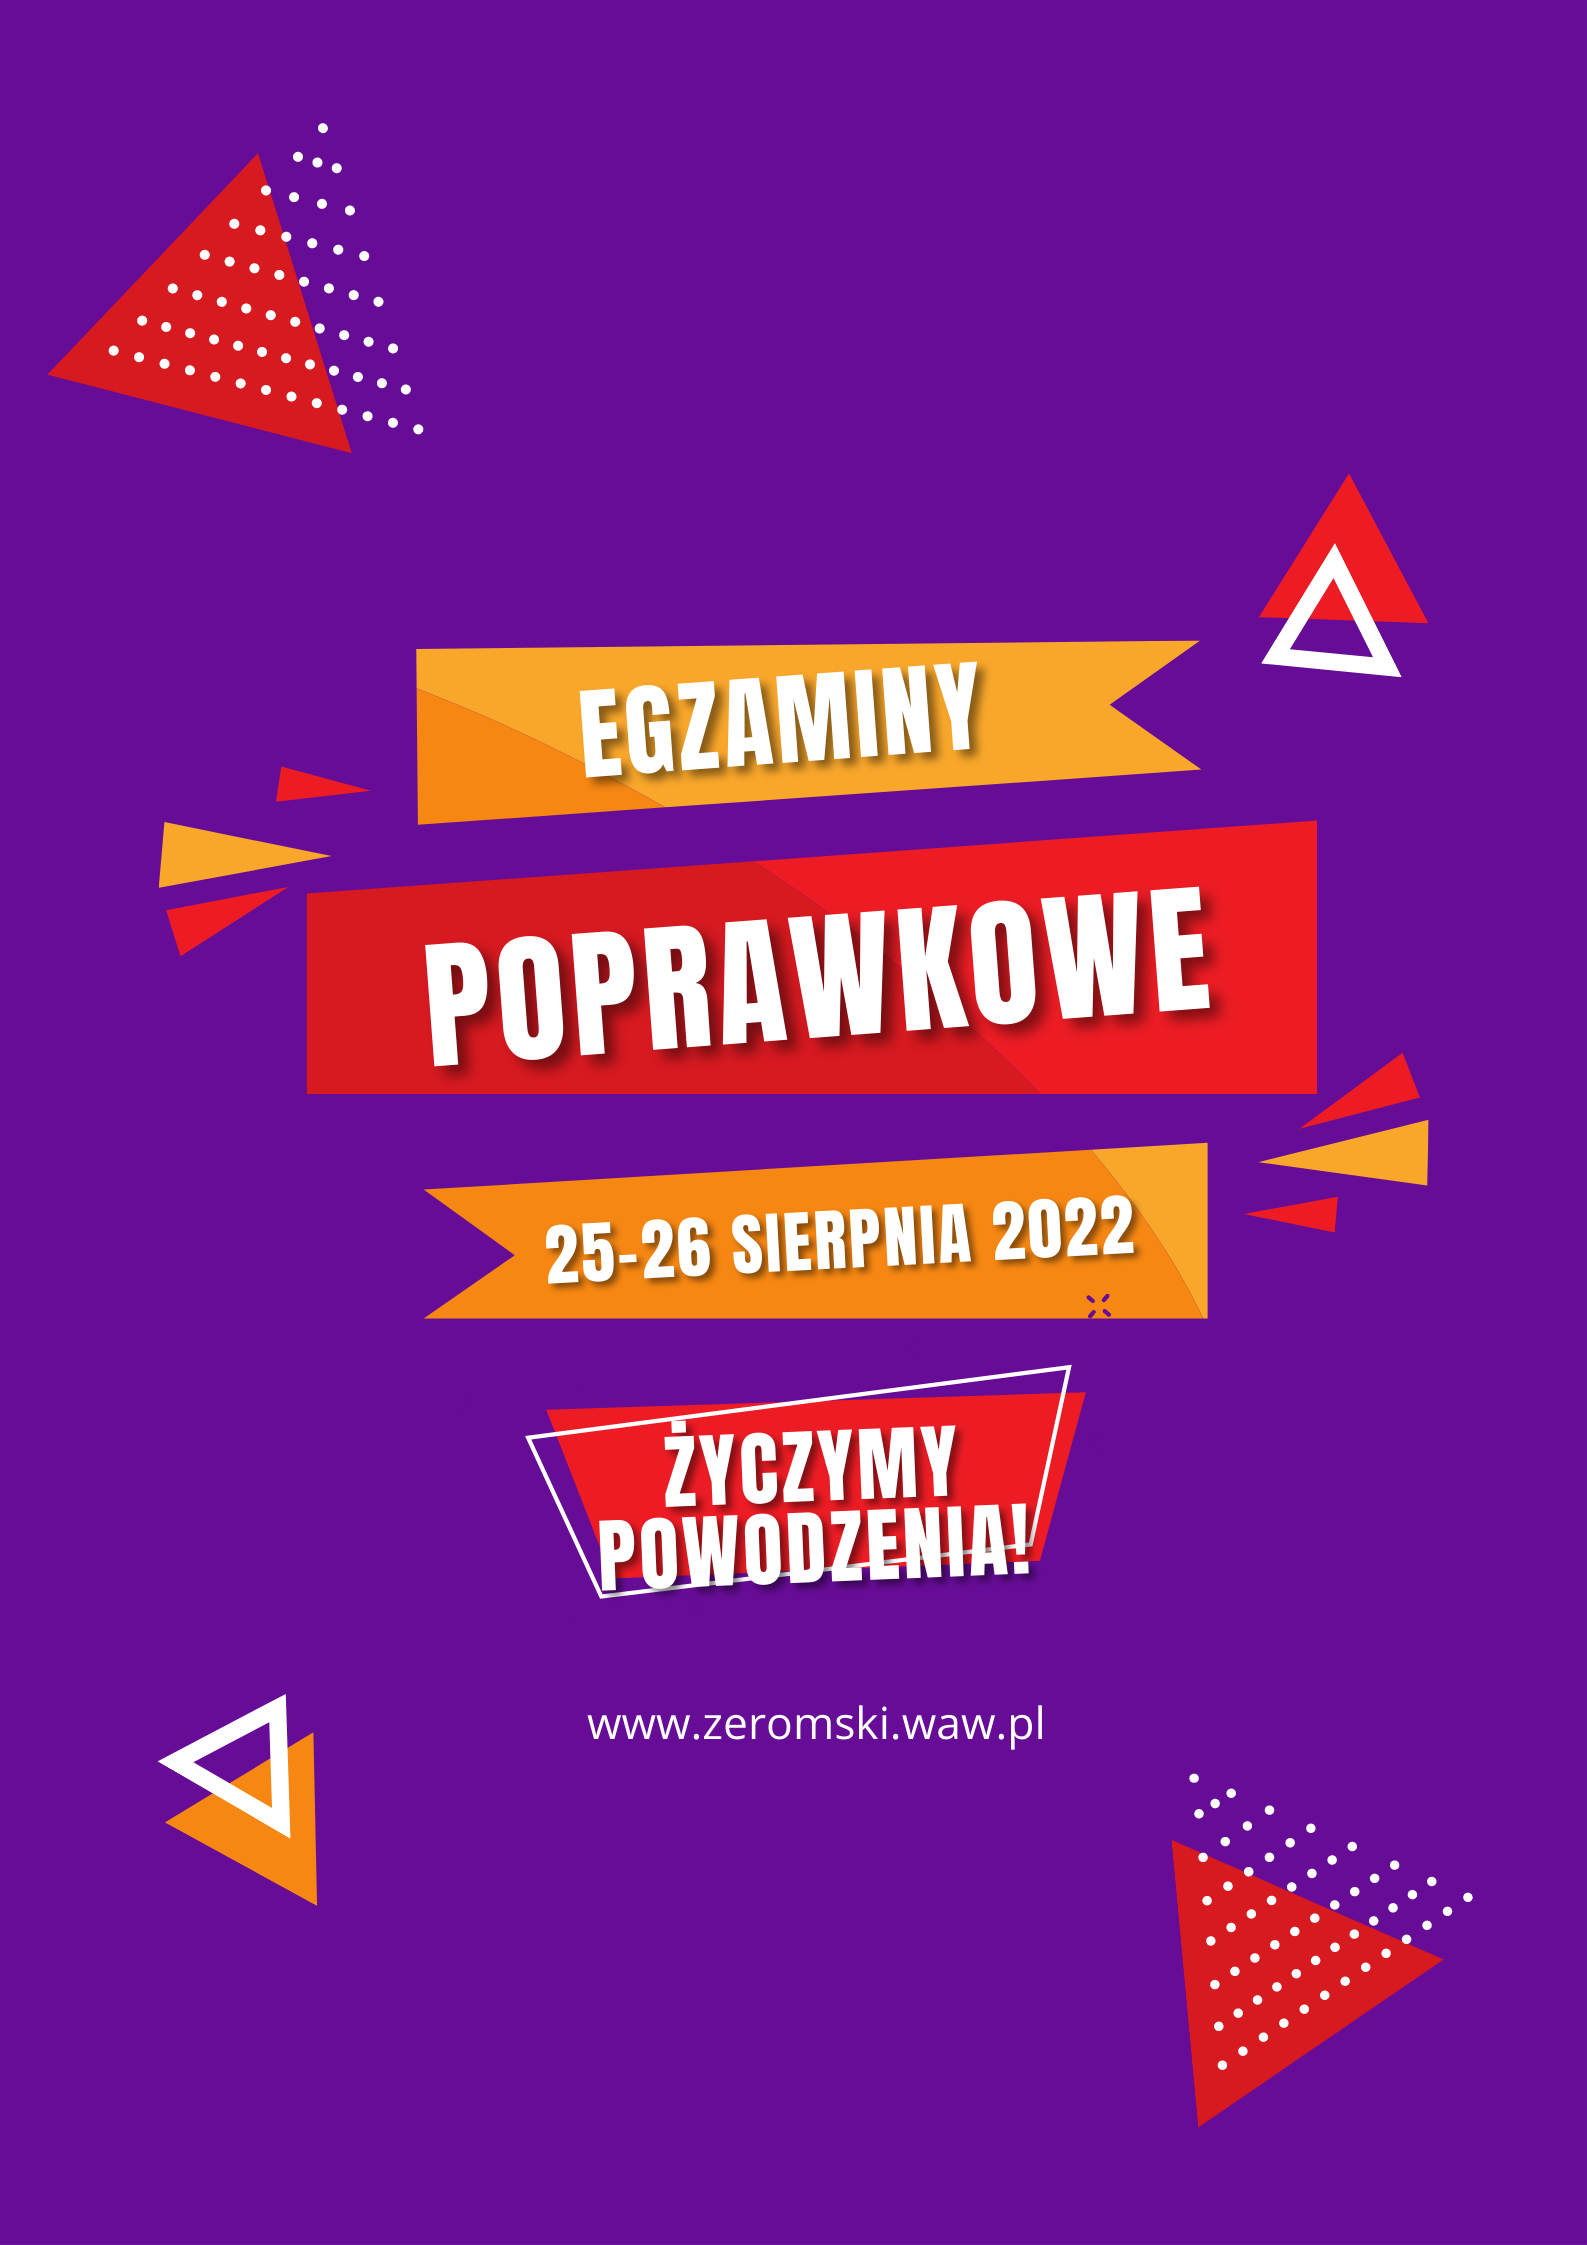 You are currently viewing Egzaminy poprawkowe